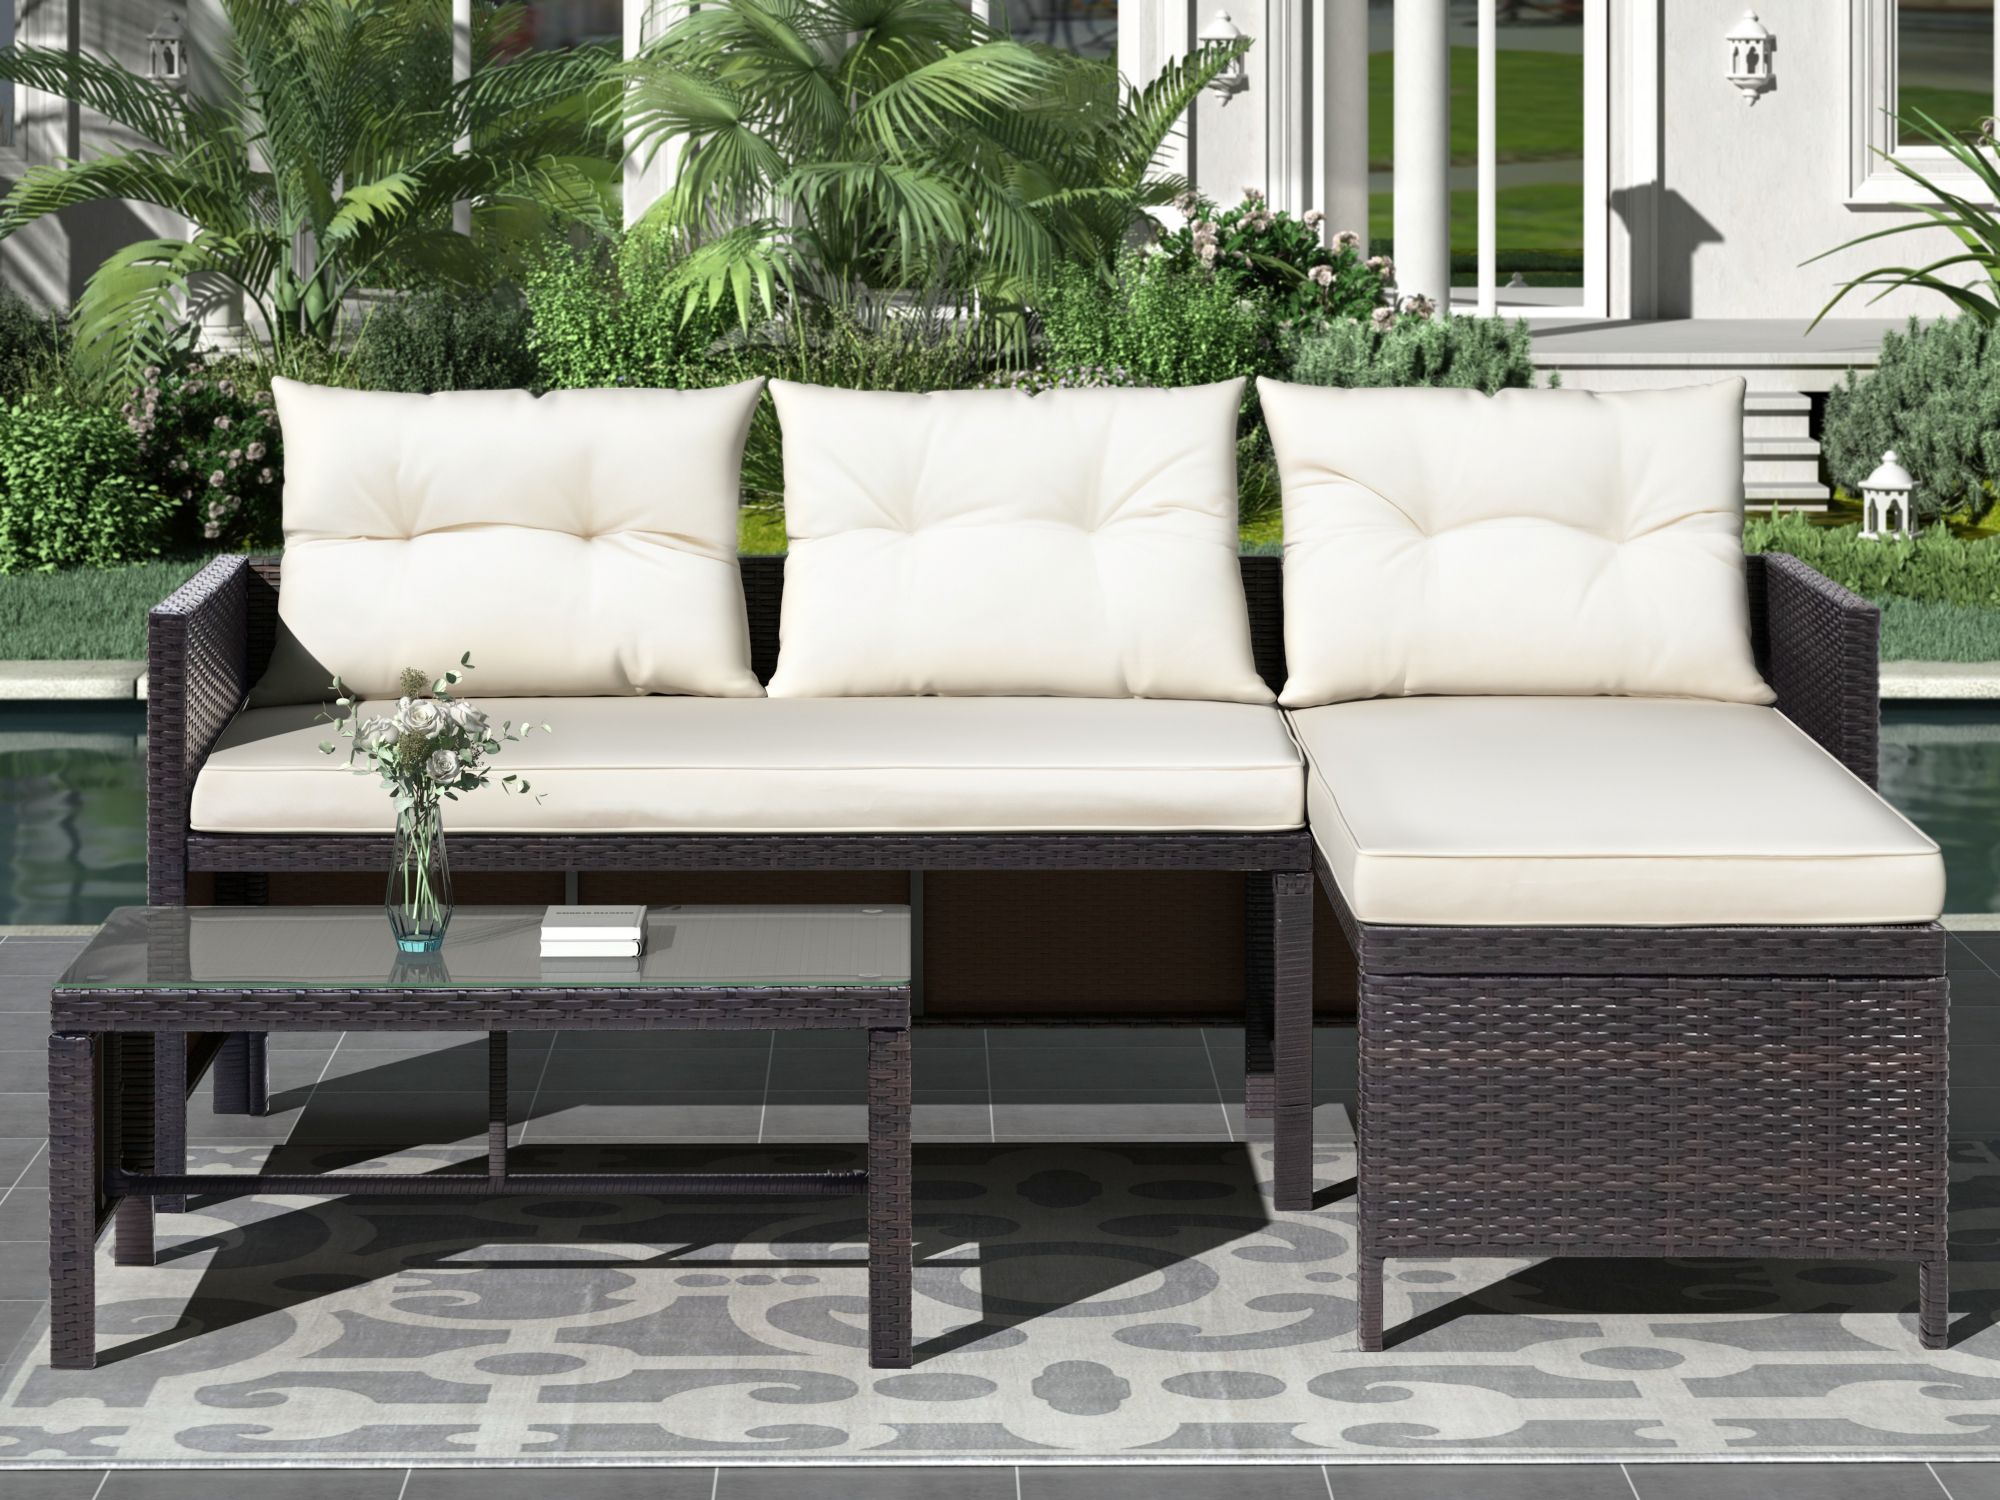 Patio Dining Sets Clearance, 3 Piece Patio Furniture Sets With Pe Throughout 3 Piece Console Tables (Gallery 19 of 20)